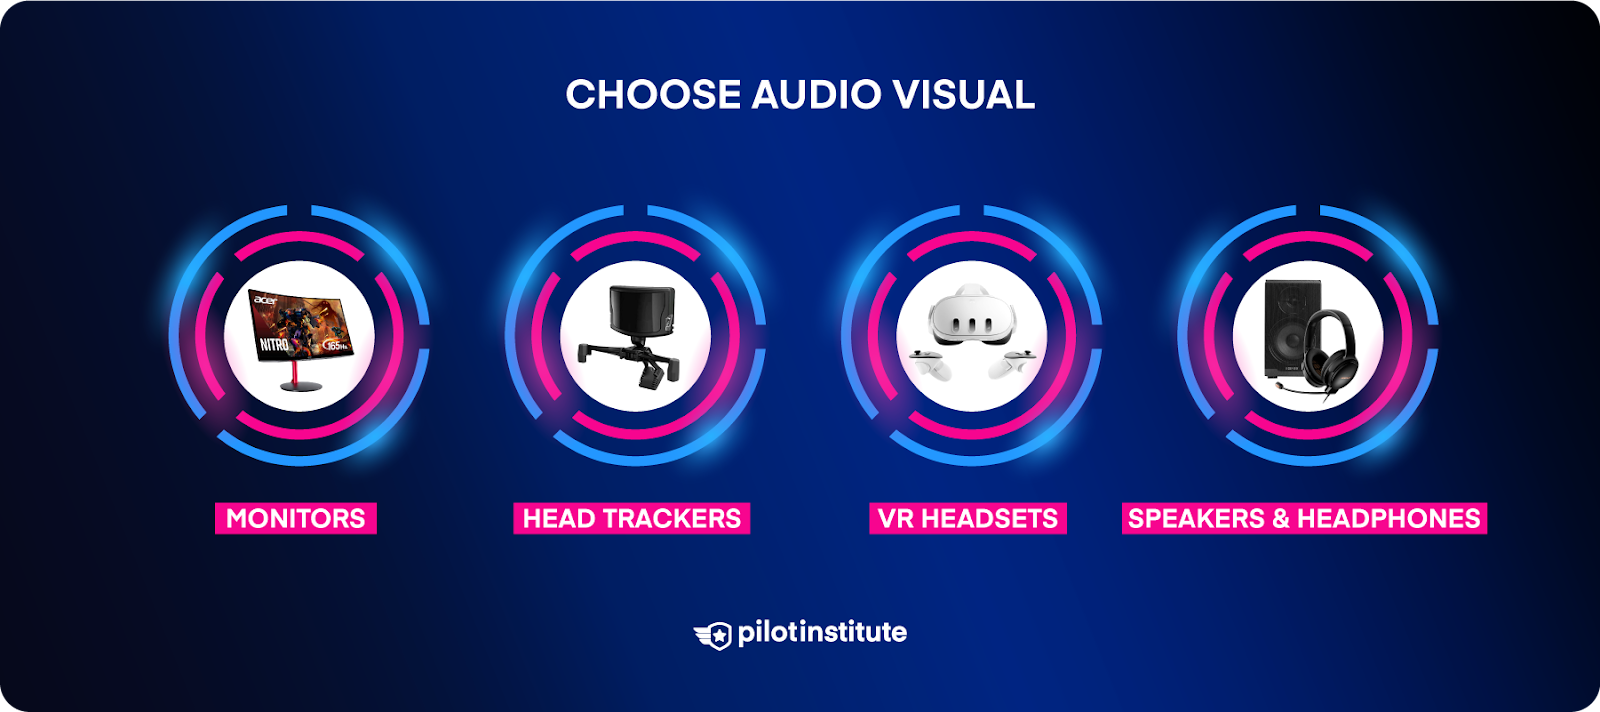 Audio Visual infographic depicting monitors, head trackers, VR headsets, and speakers & headphones.